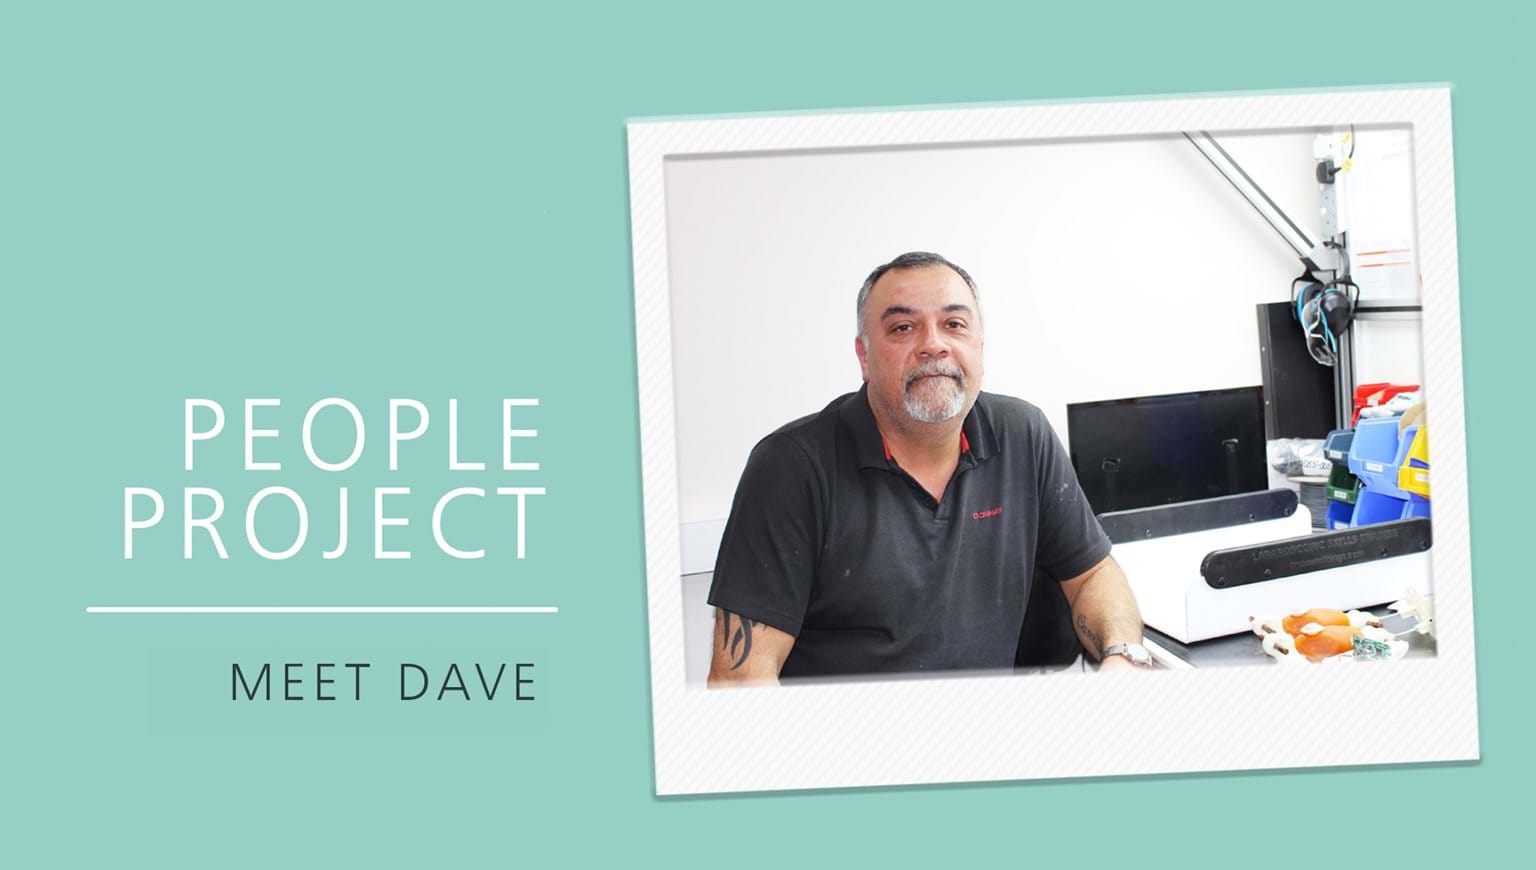 People Project - Meet Dave